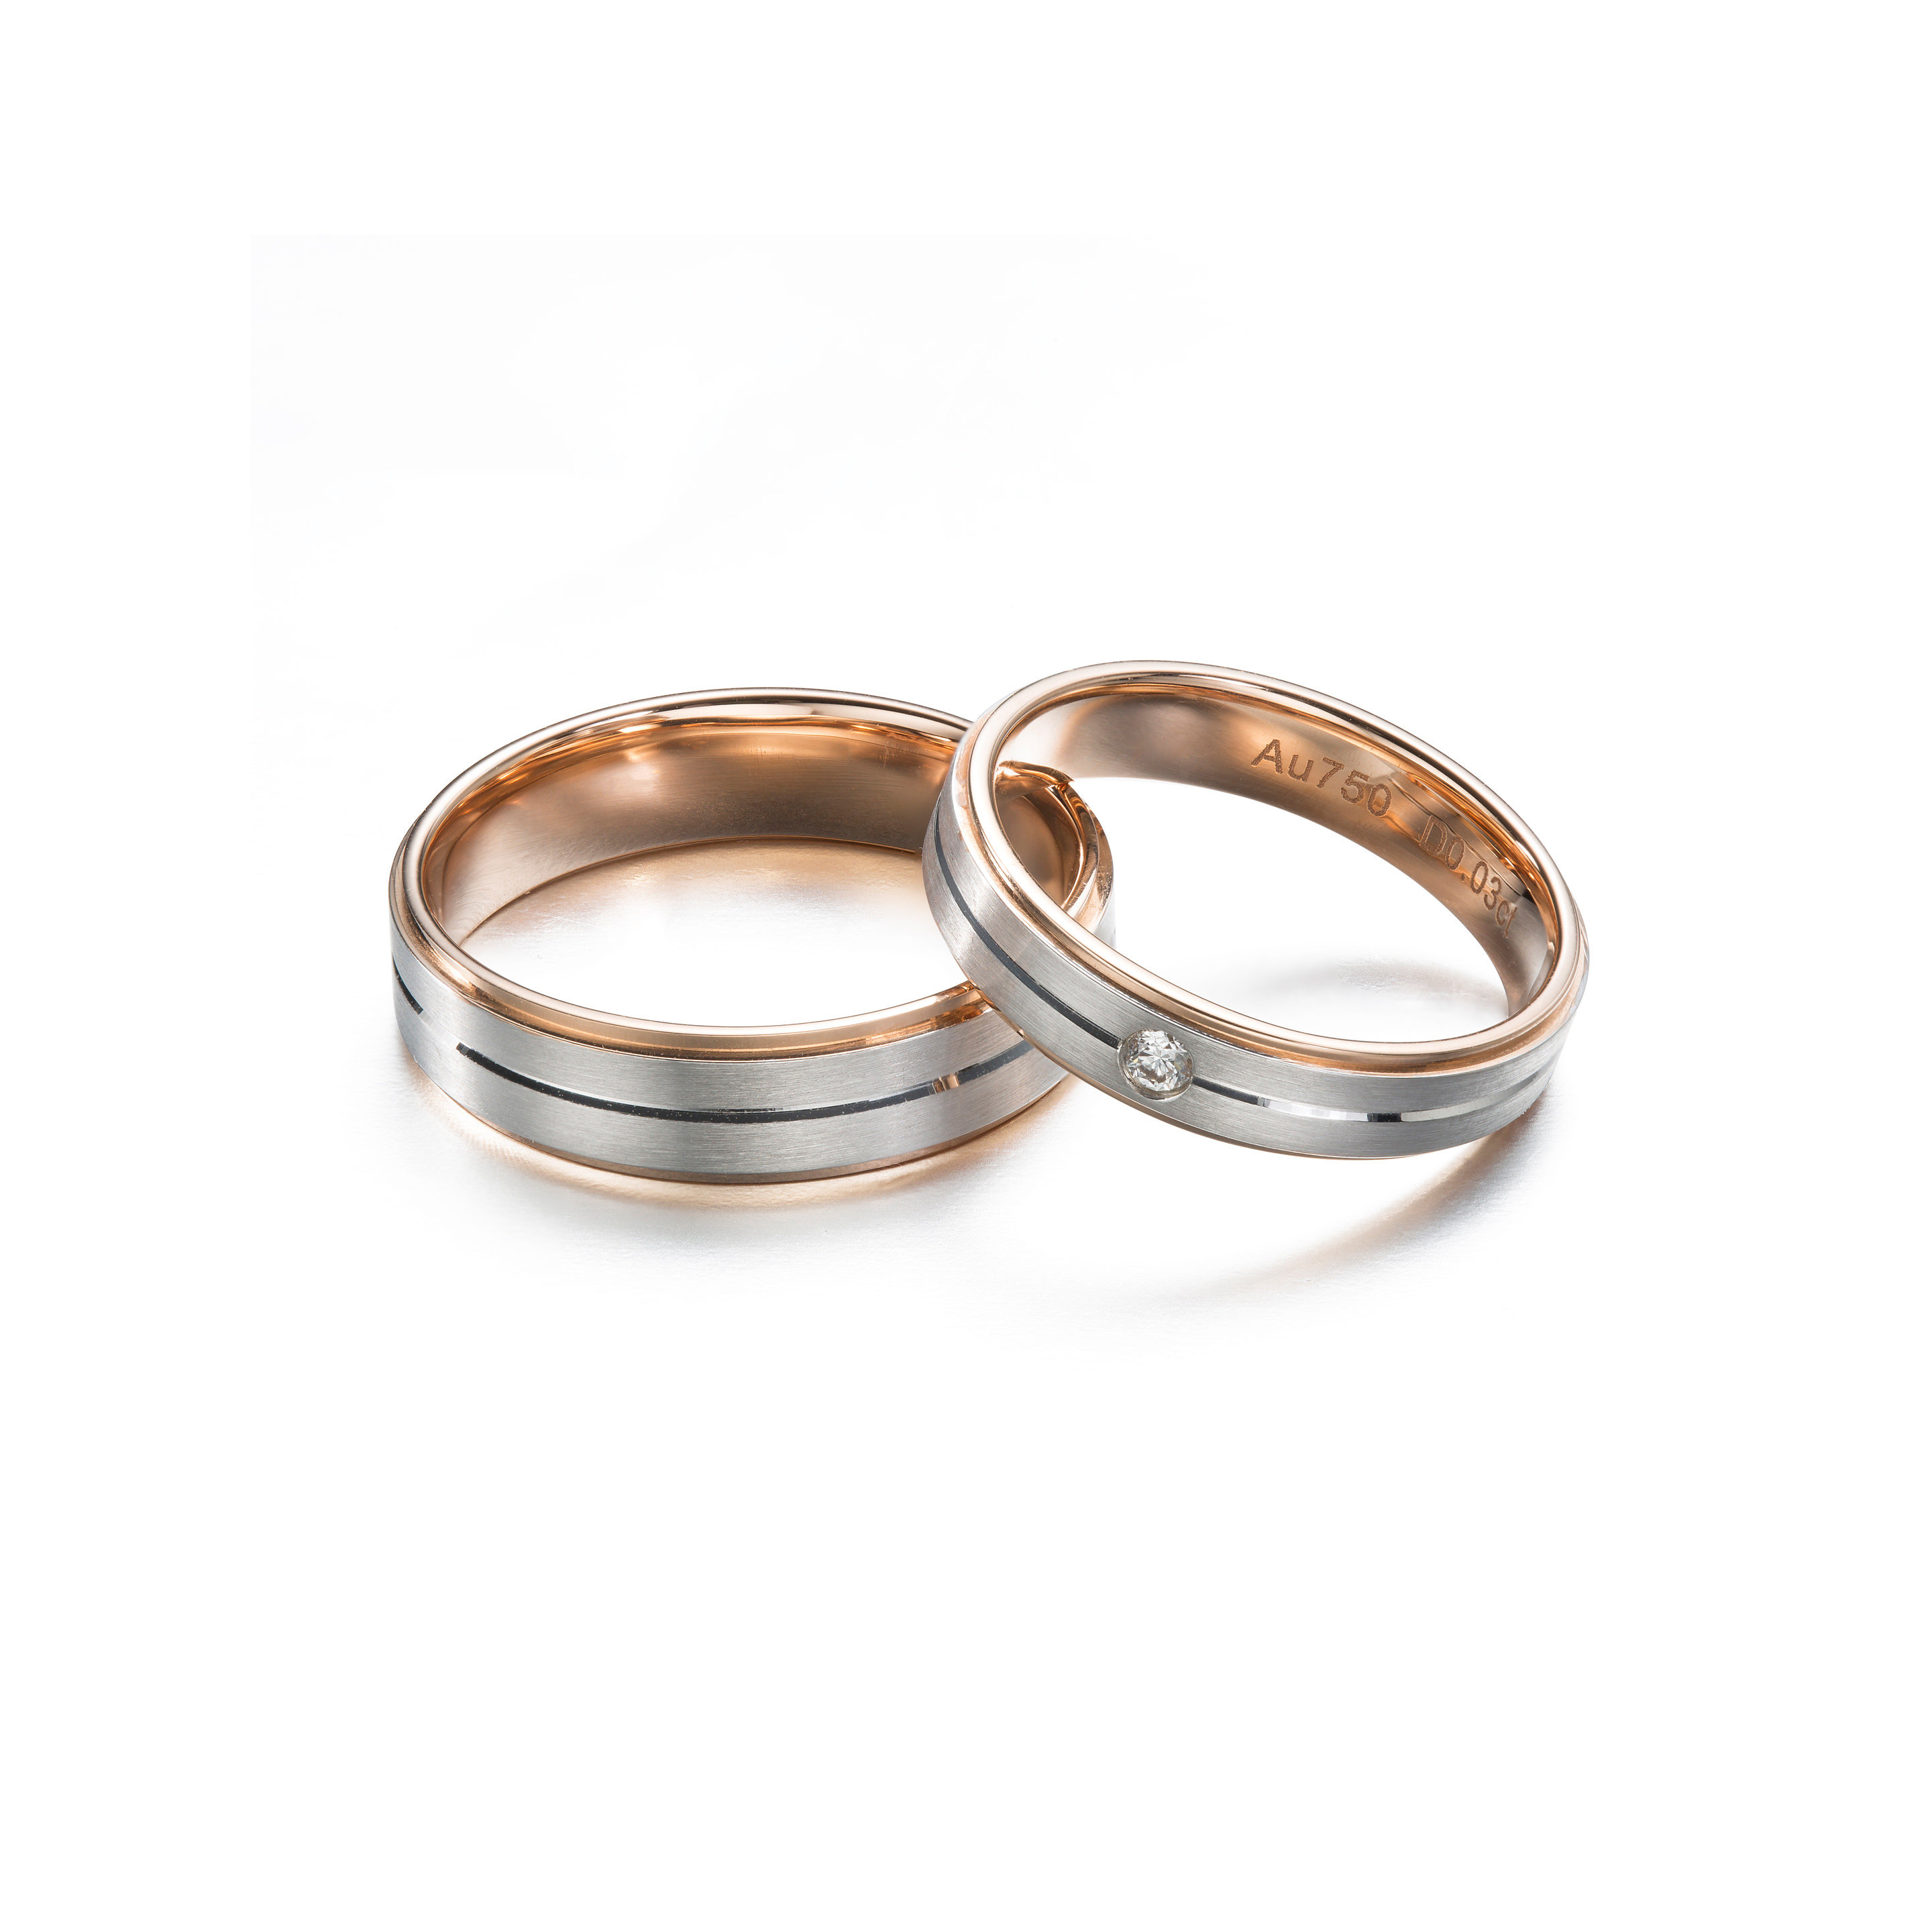 Sophistication In Harmony - Dual-Tone Wedding Bands